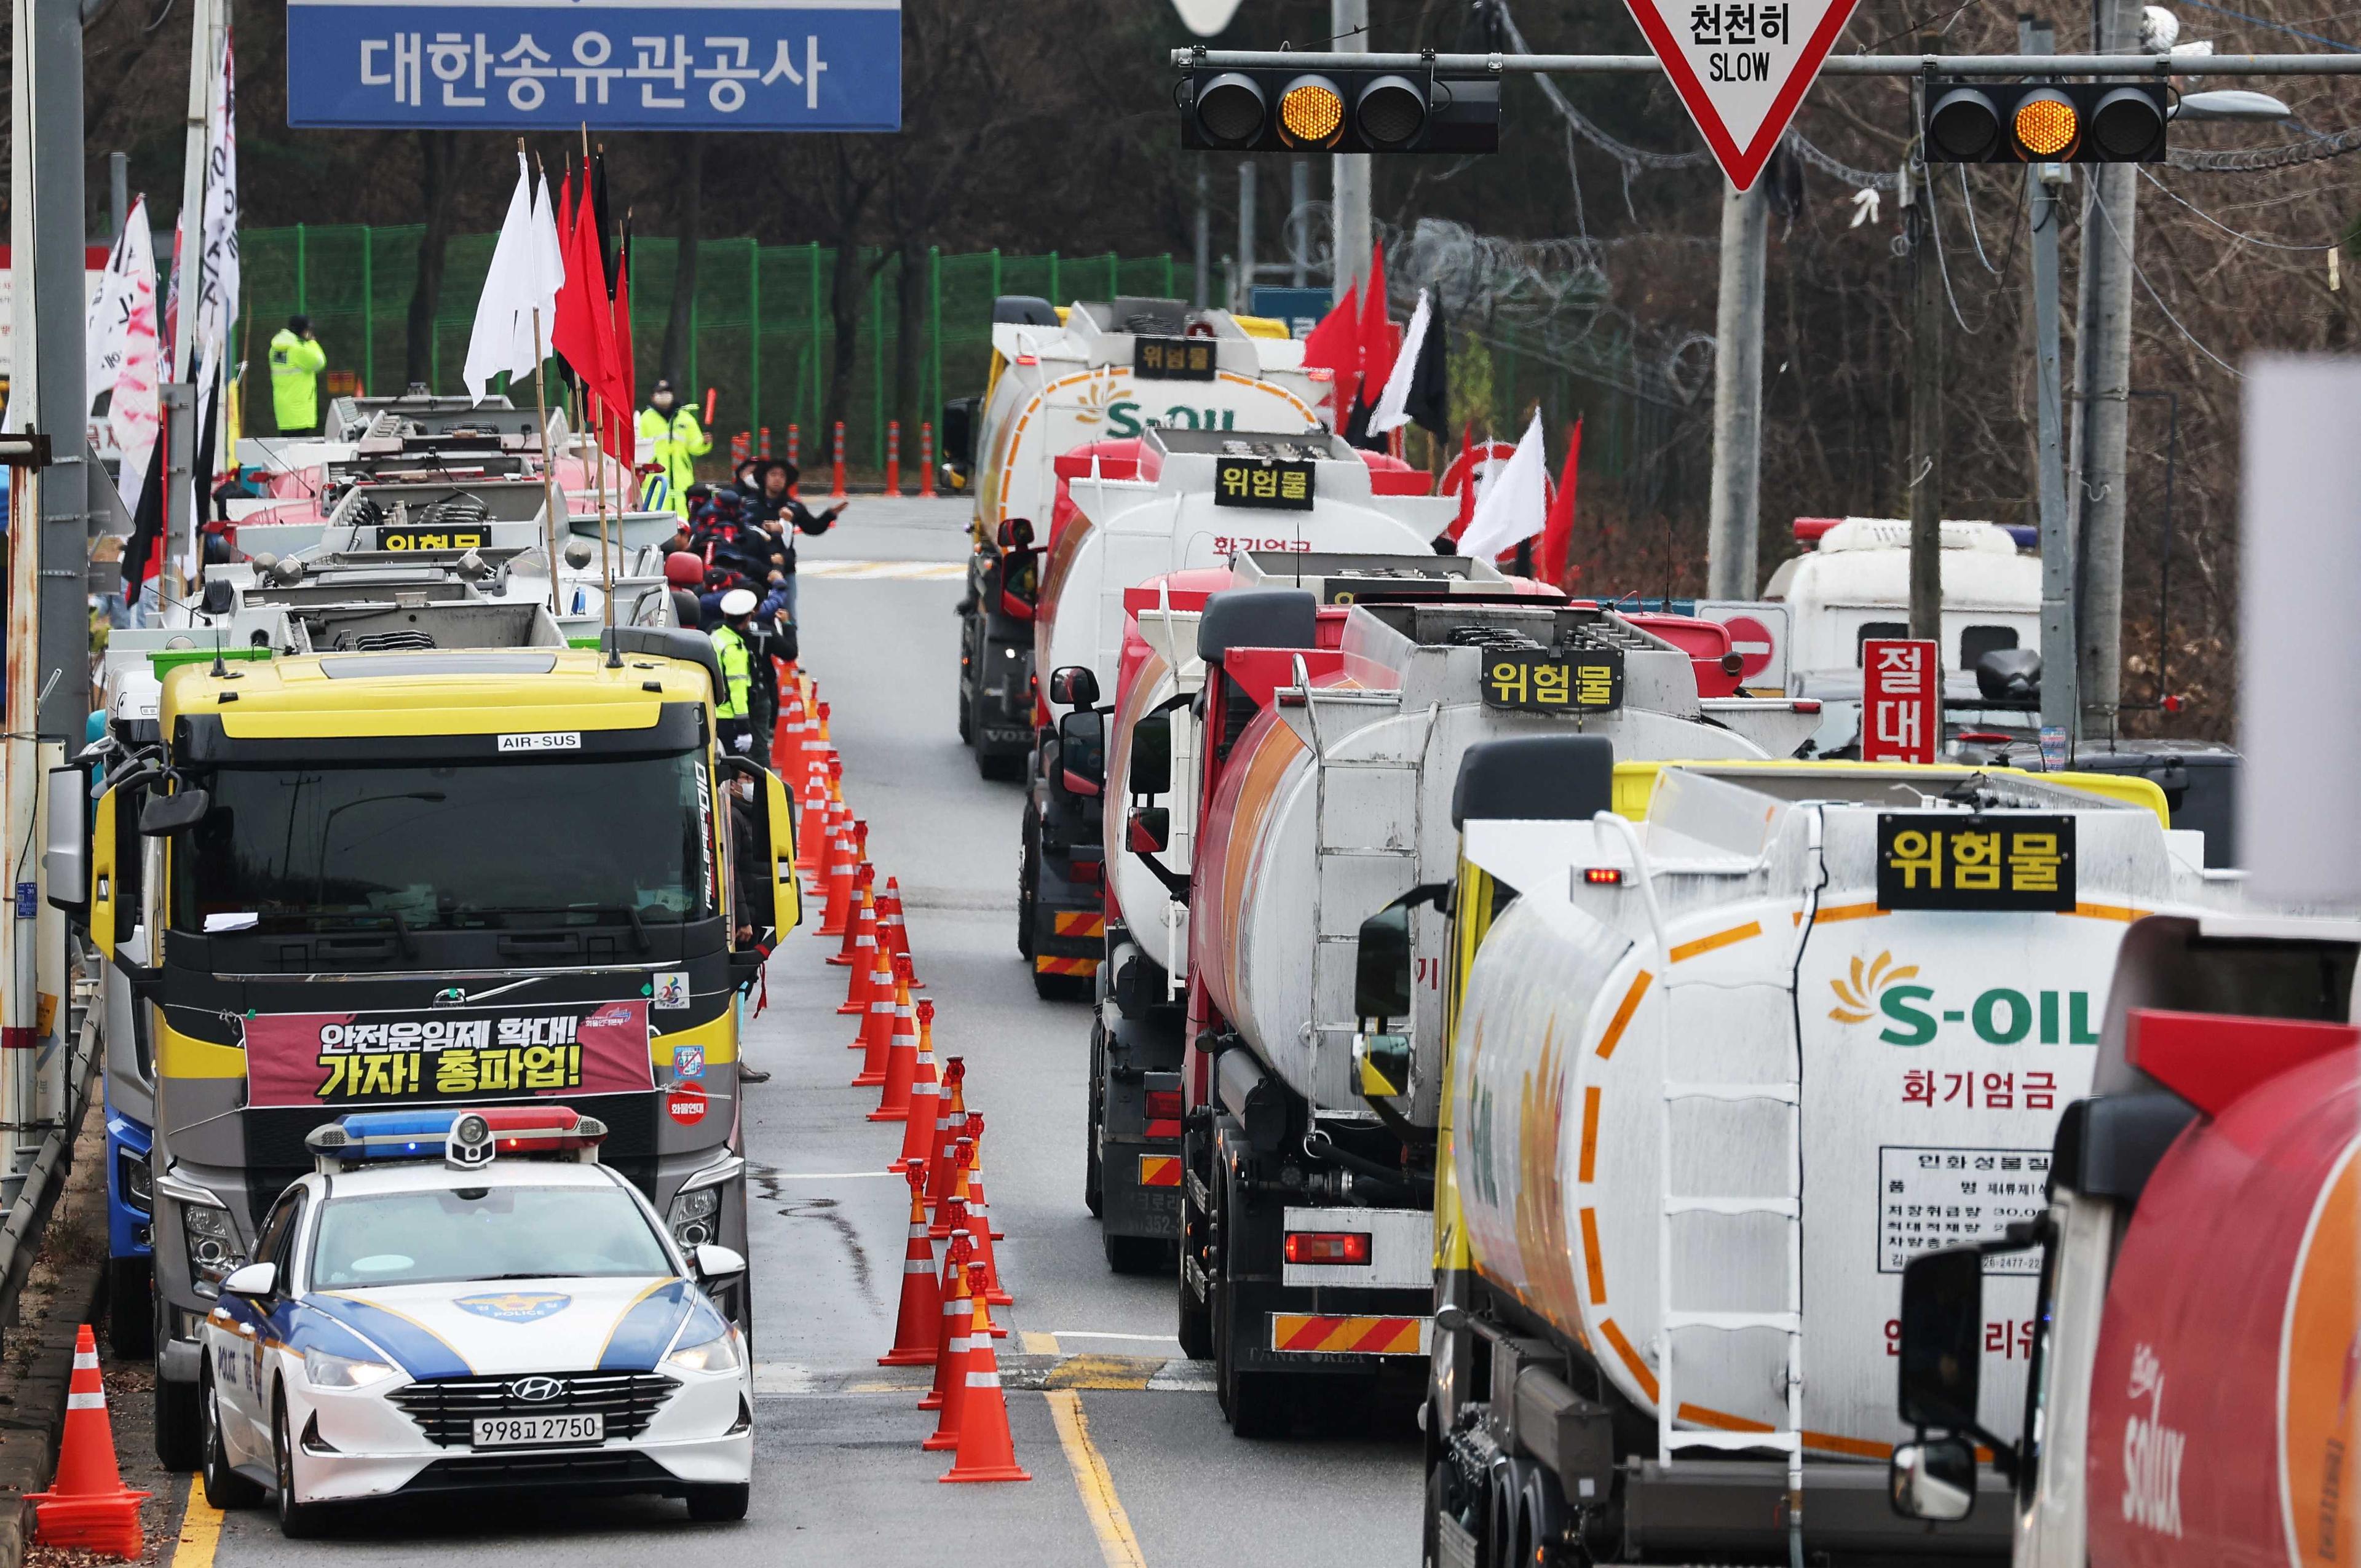 Tankers drive past other tankers taking part in a strike by a truckers' union in Sungnam, South Korea Nov 28. Photo: Reuters